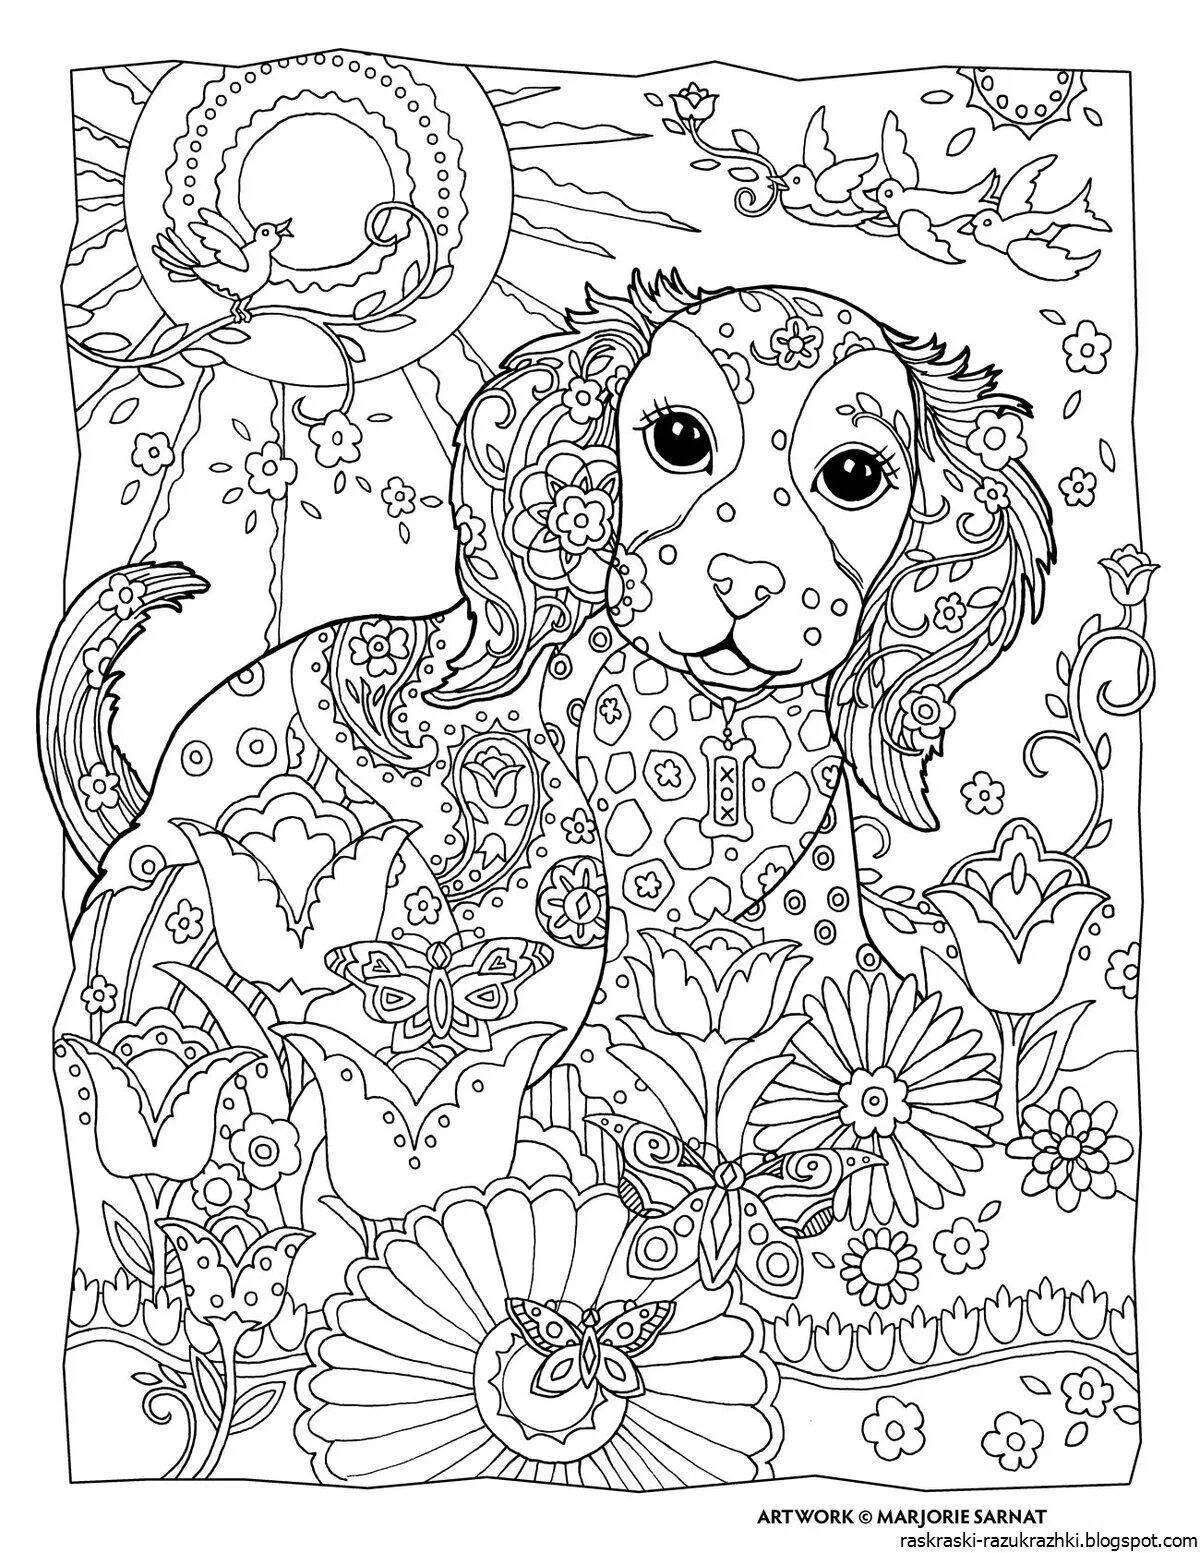 Colorful anti-stress coloring book for children 10 years old